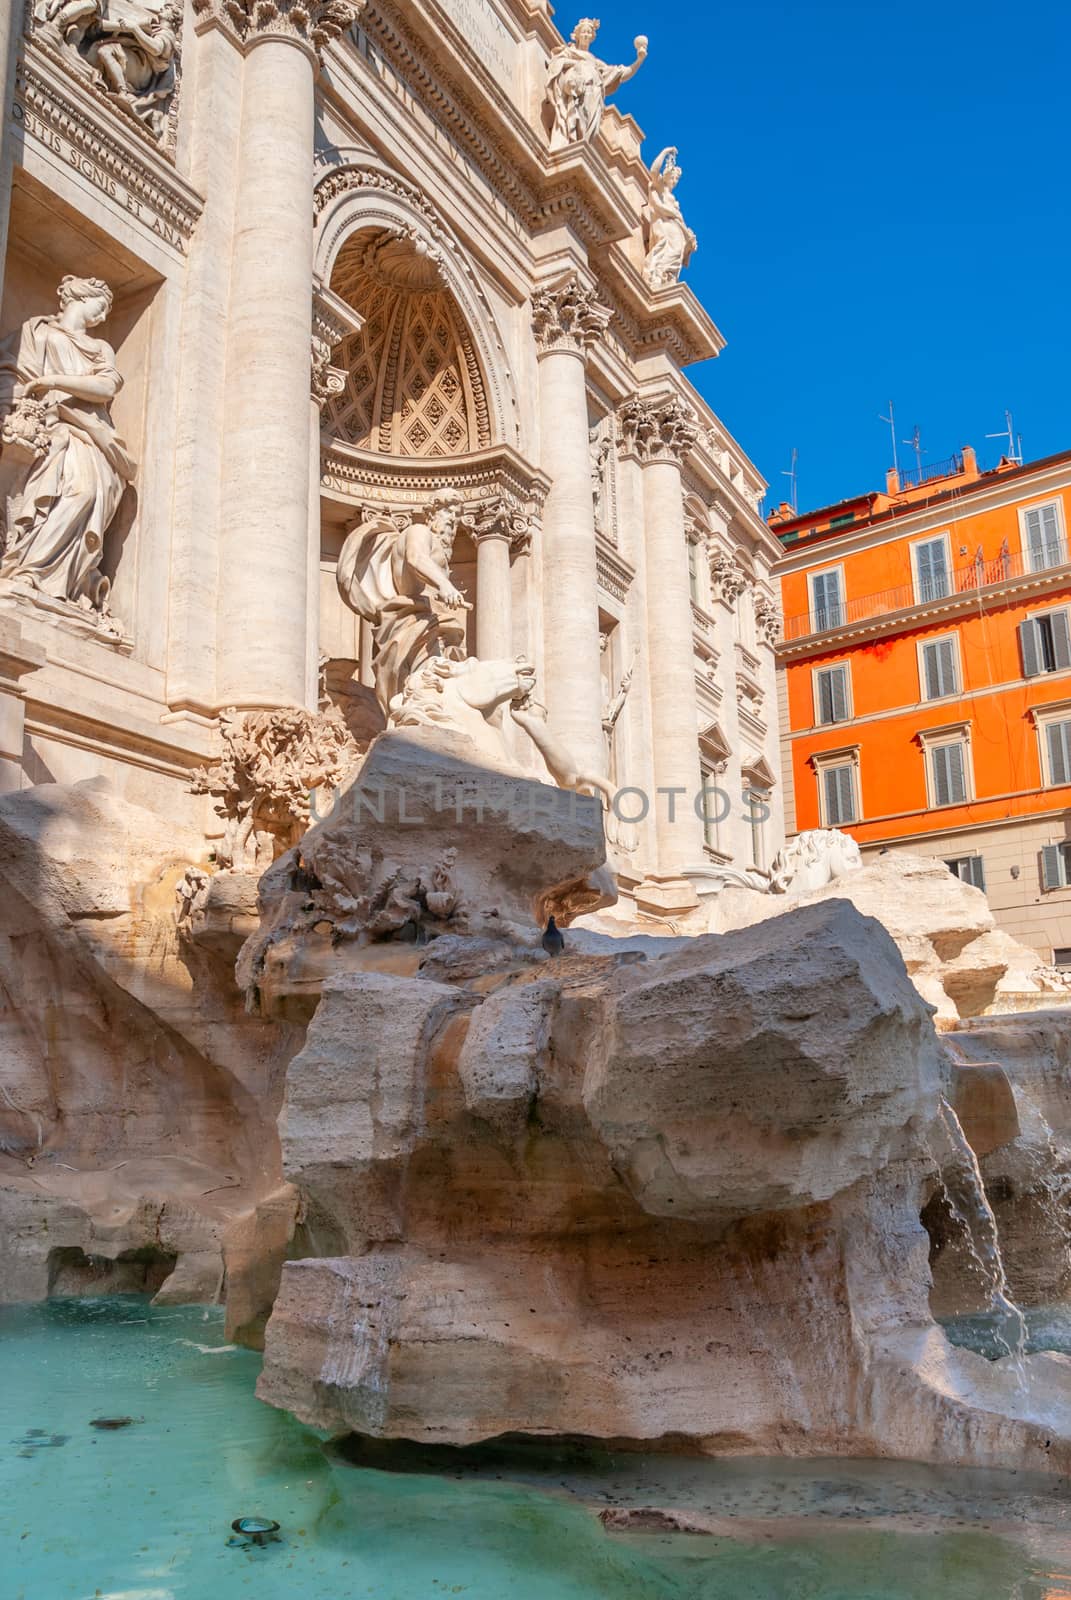 Trevi Fountain, Rome, Italy. Trevi Fountain is one of the main tourist attractions in the city. Beautiful view of Trevi Fontana in summer. Ornate baroque architecture of Trevi, nice Roma landmark.